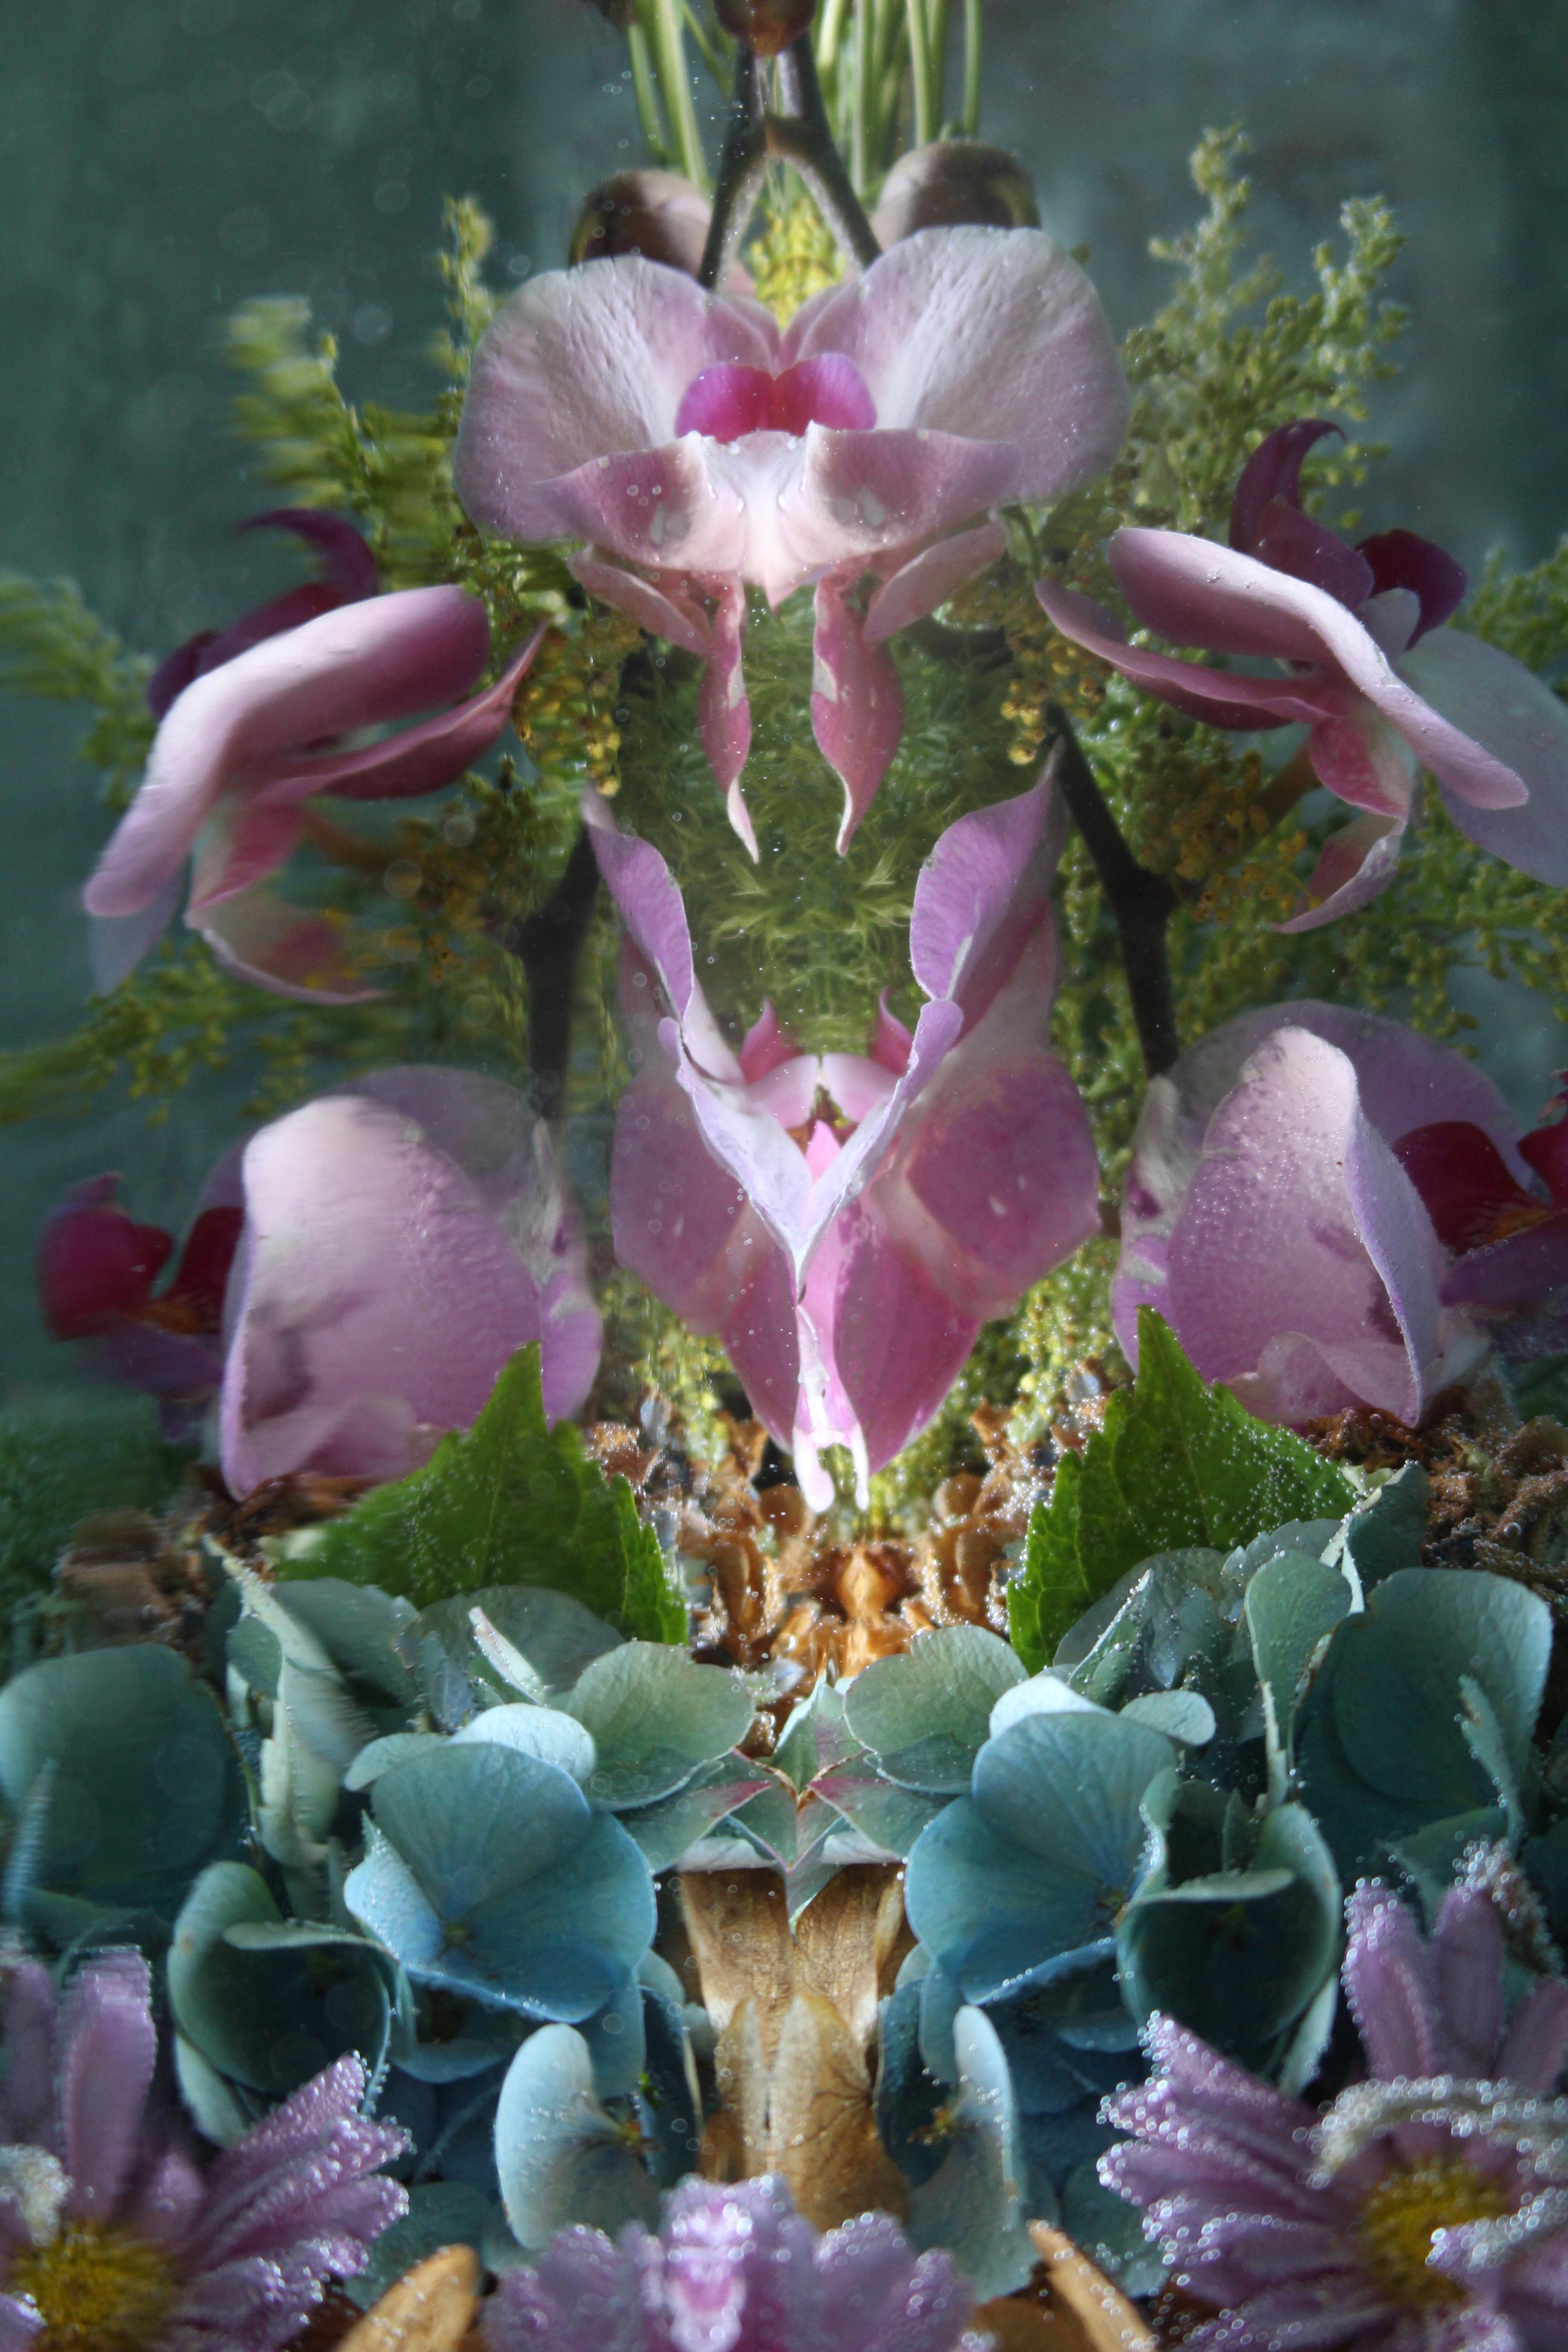 Andrea Bonfils - Submerged Garden 8937, Photography 2015, Printed After